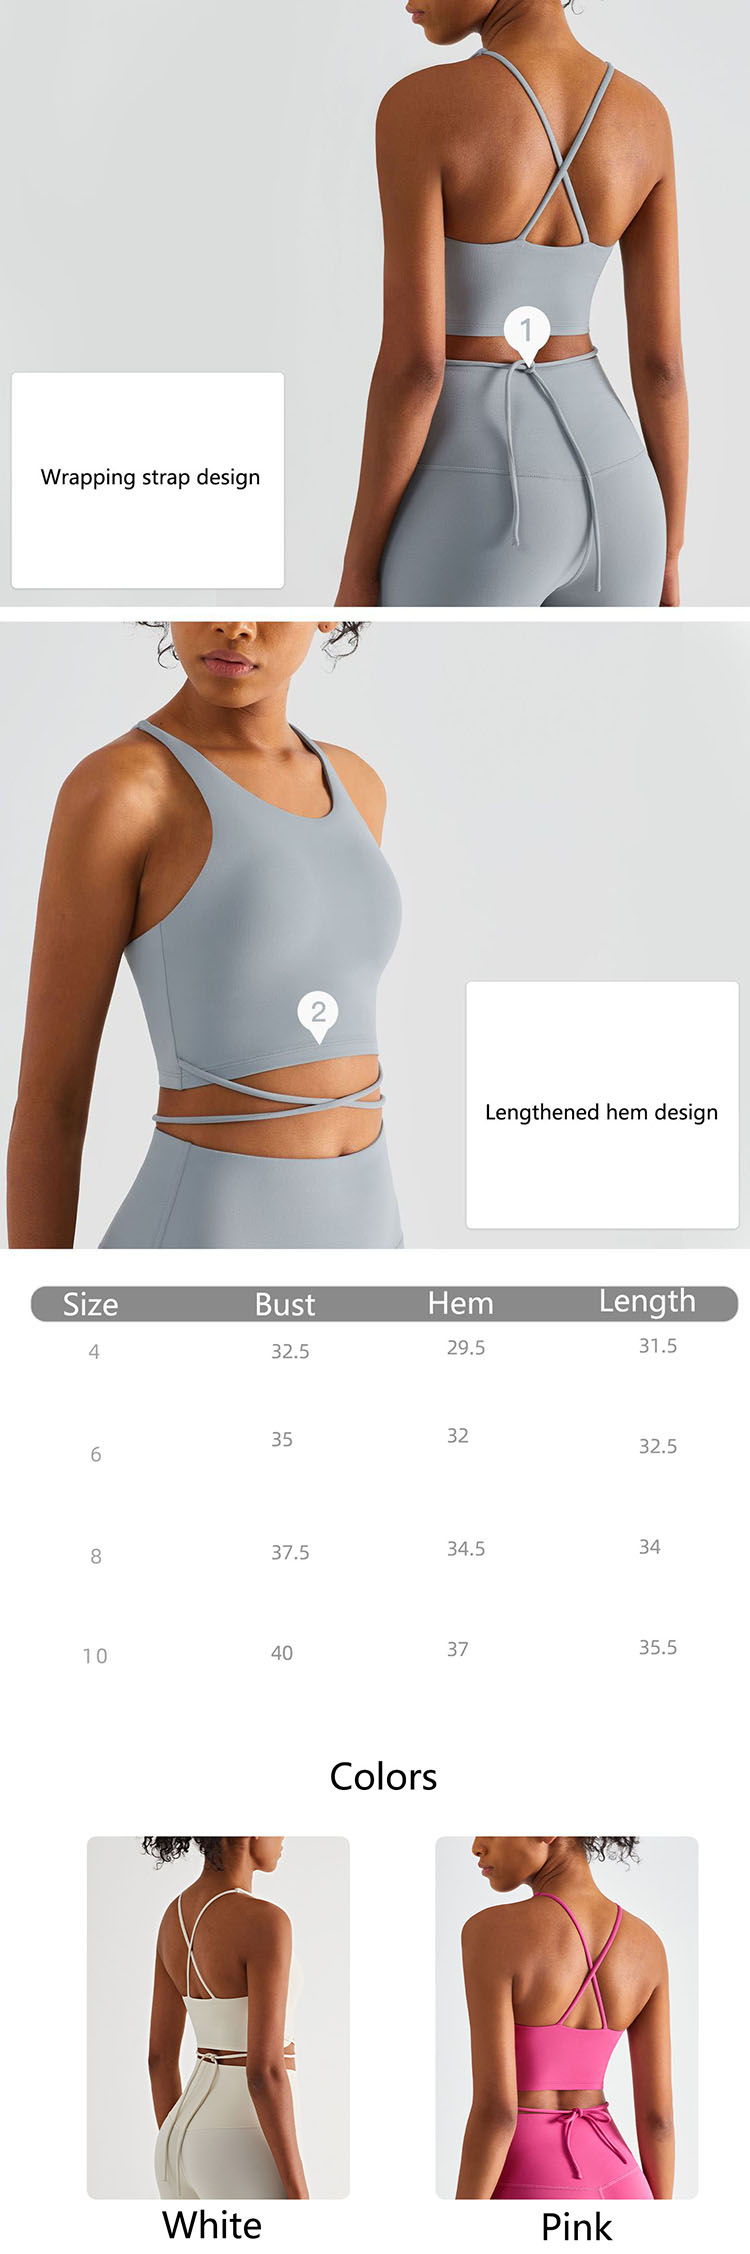 Drawing inspiration from the design of slim fit bra, it provides consumers with delicate and feminine layering